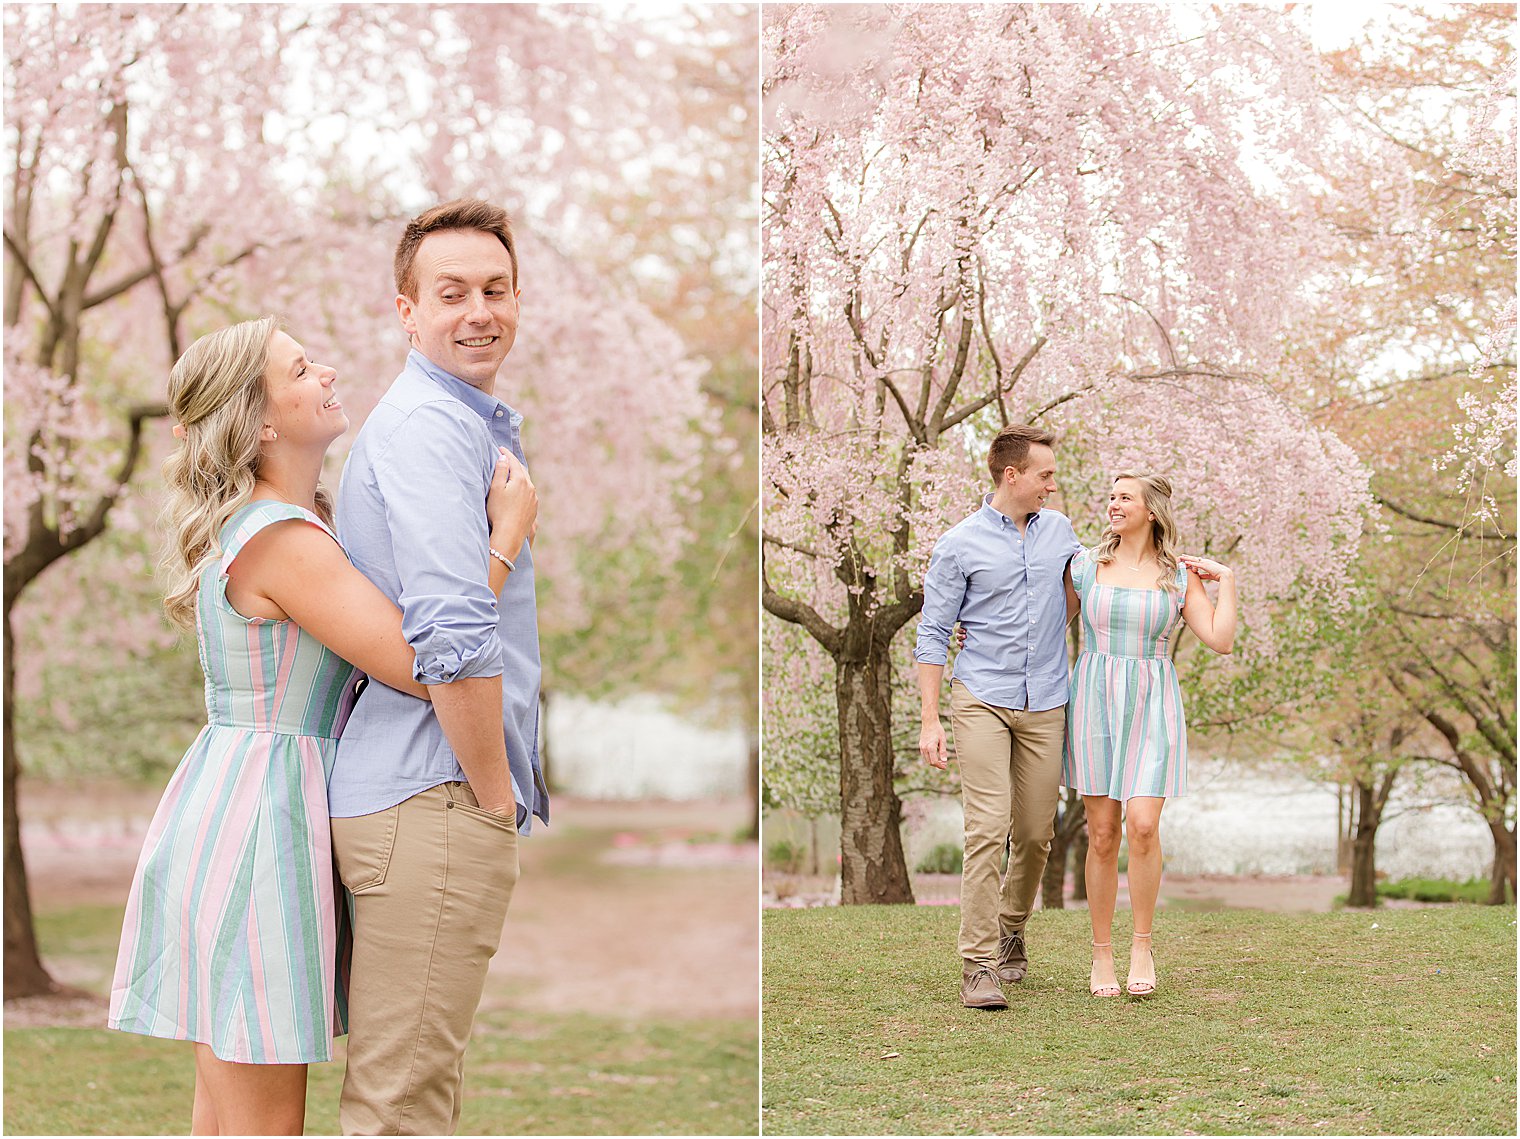 engaged couple poses in NJ park near cherry blossoms